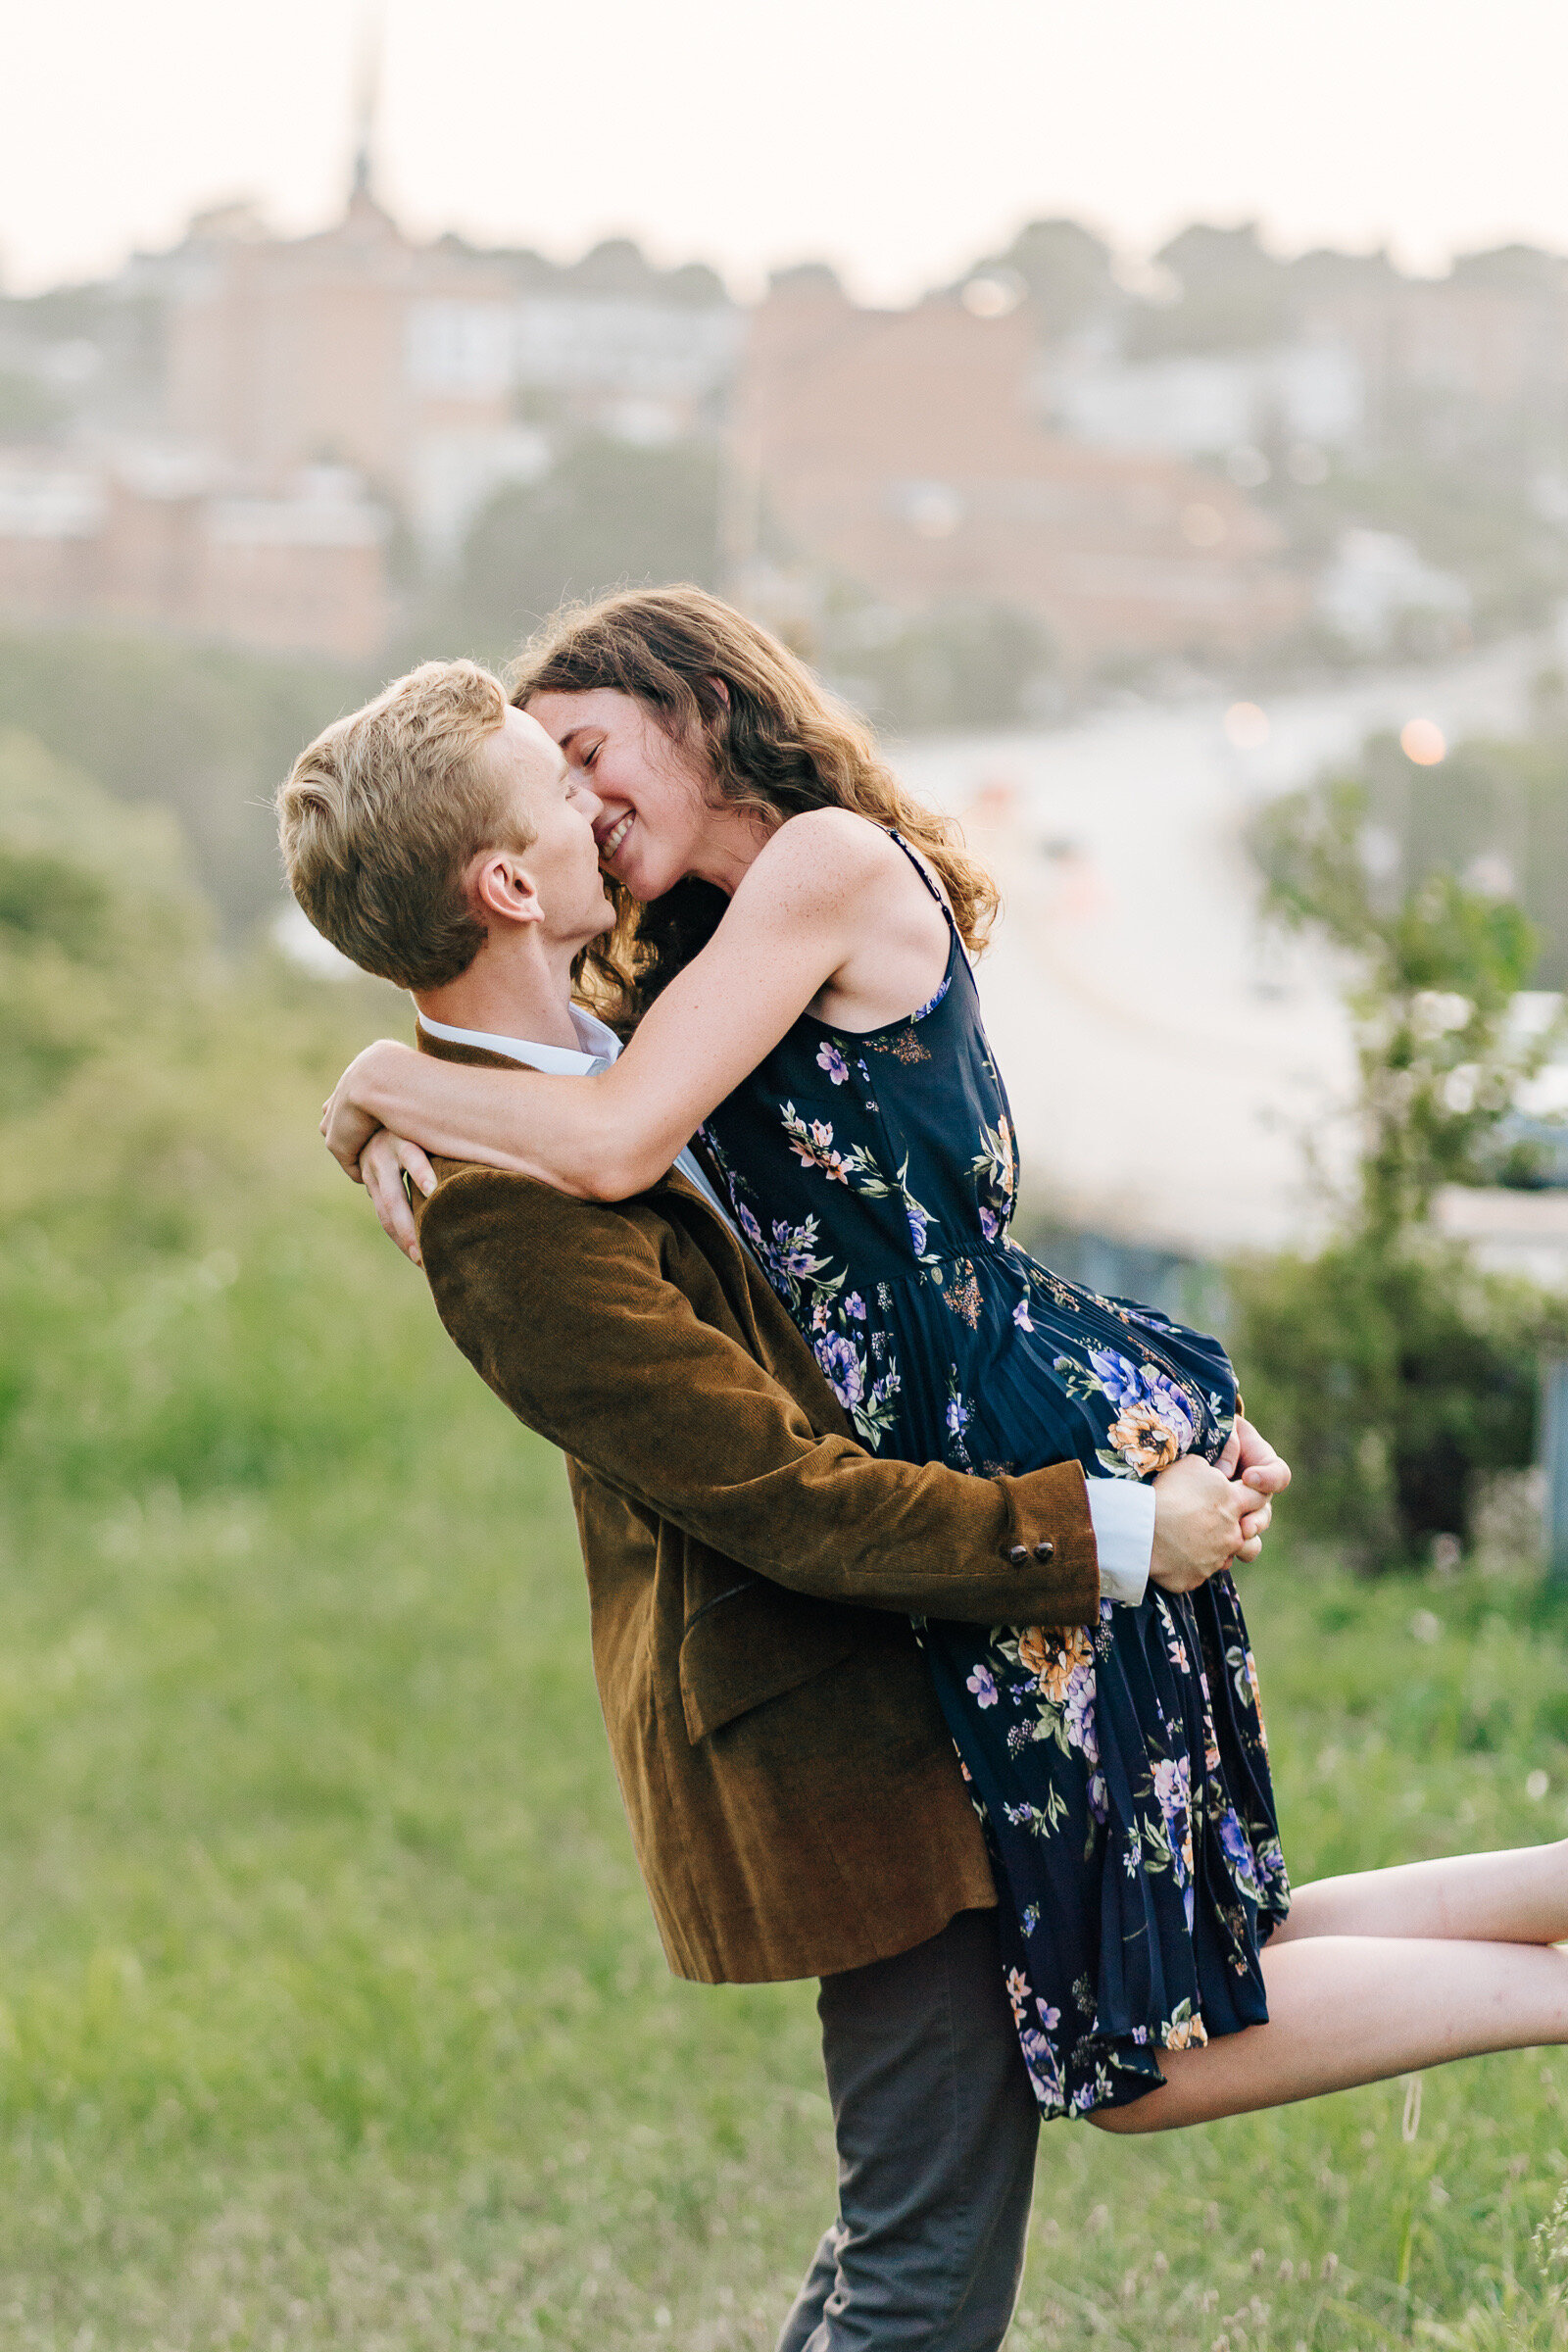 grant-rachel-downtown-lynchburg-virginia-summer-lifestyle-in-the-river-romantic-flirty-and-fun-engagement-session-by-jonathan-hannah-photography-8.jpg